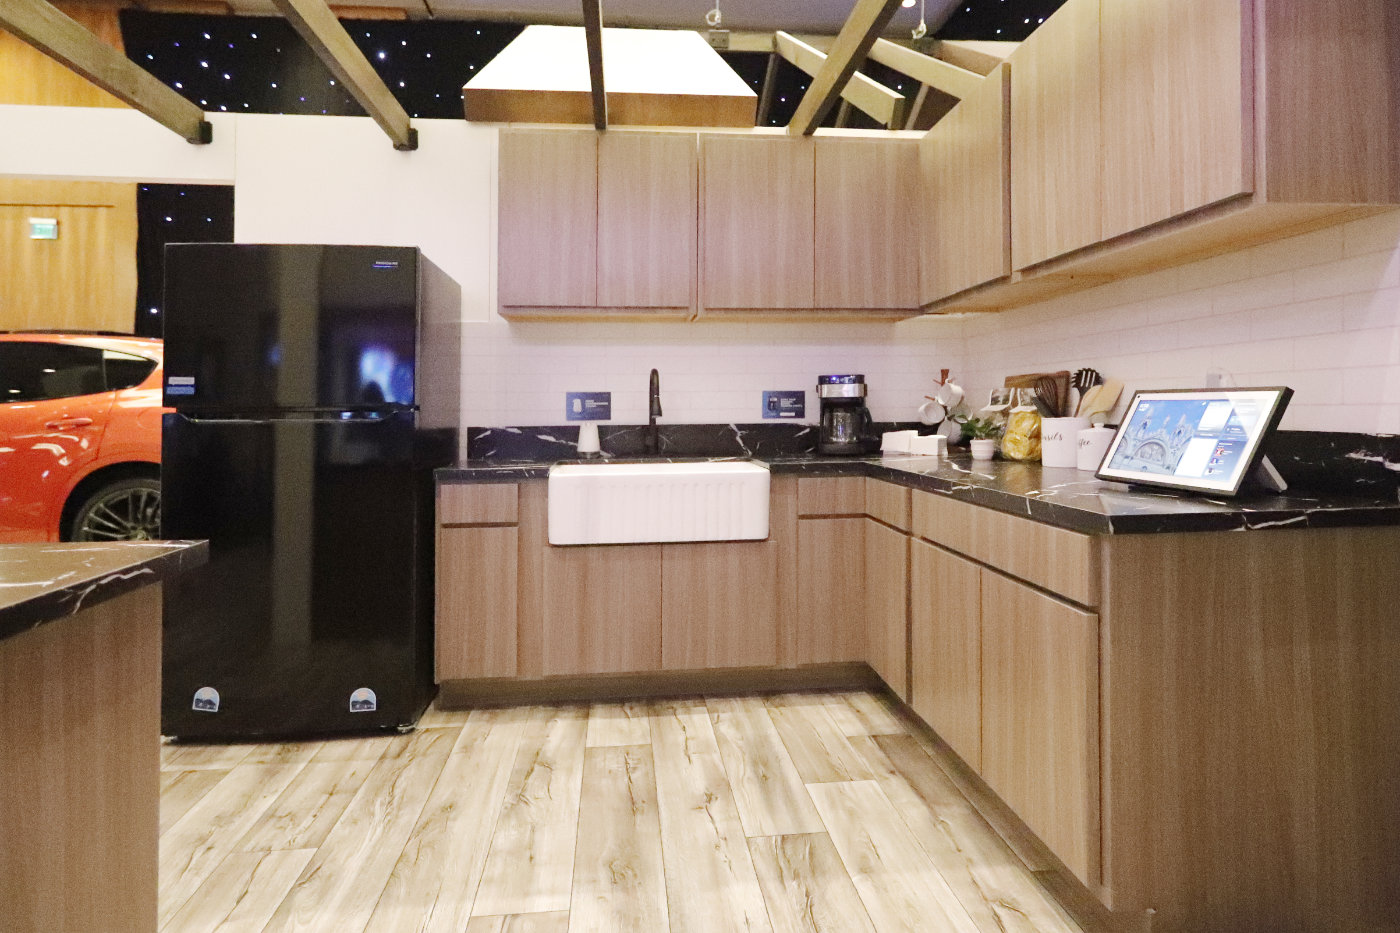 A kitchen with various Alexa tech powering it